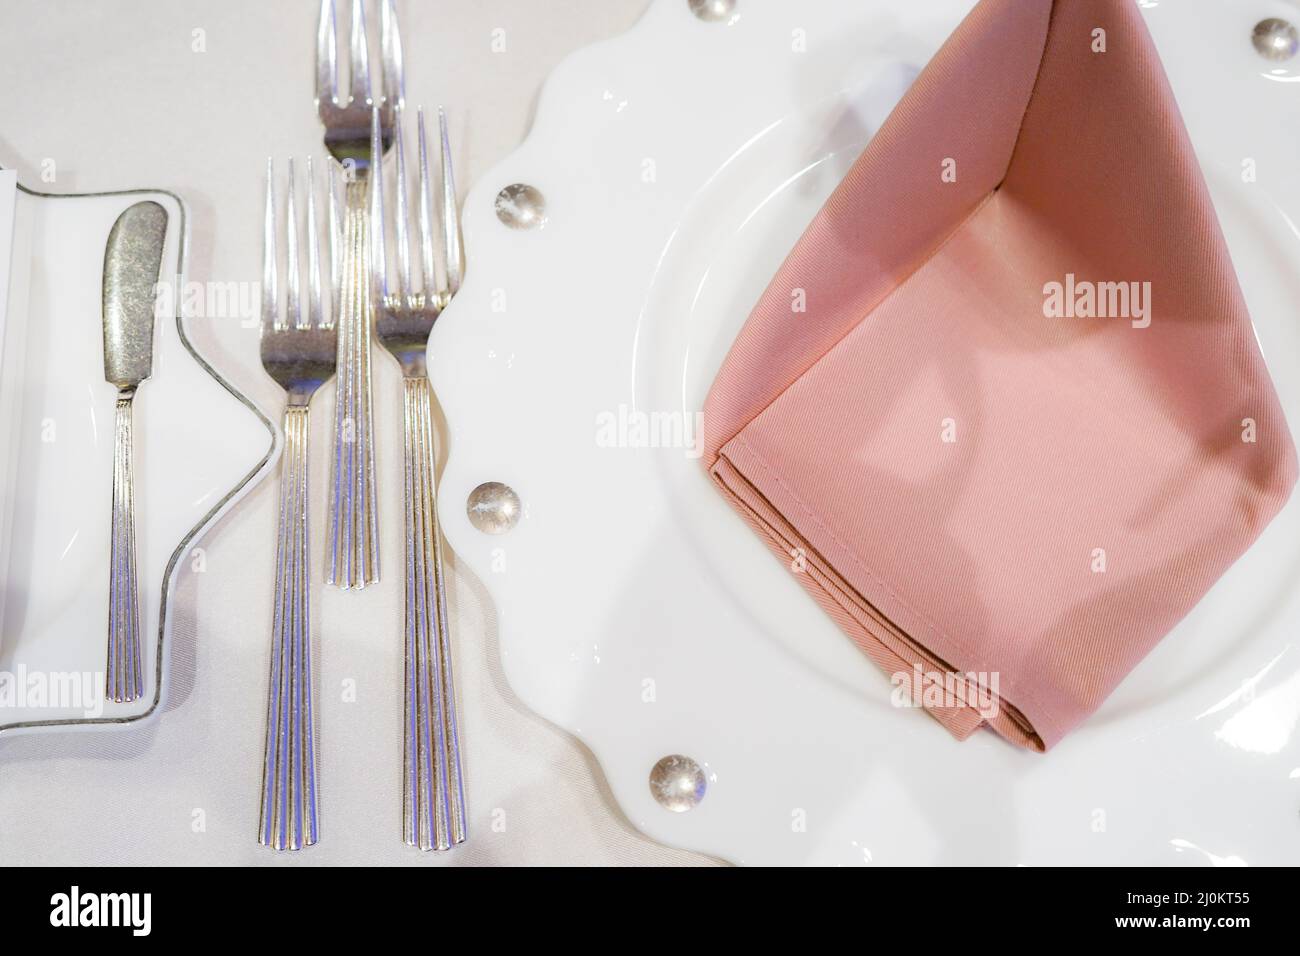 Fine dining restaurant table Making image Stock Photo